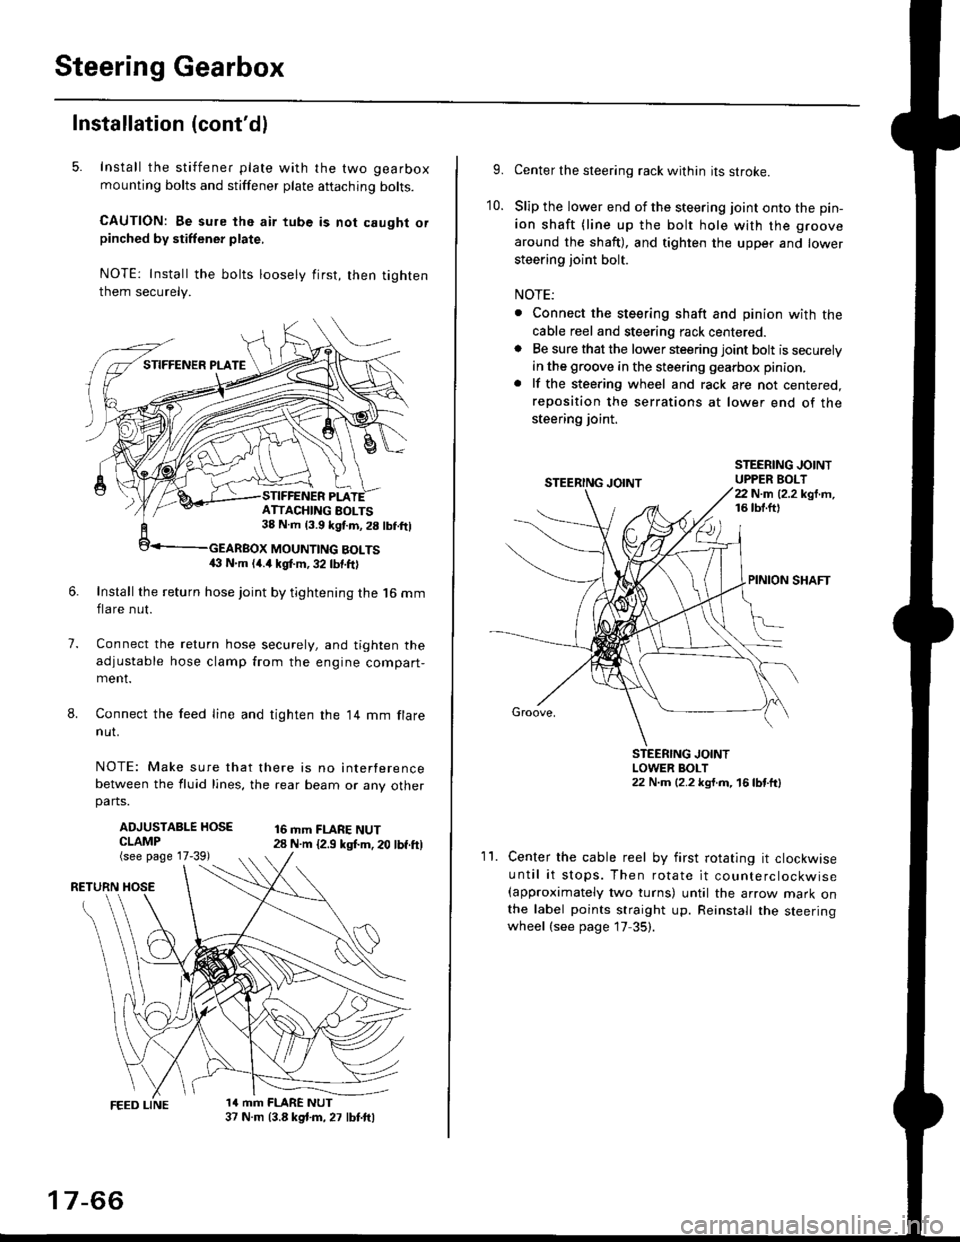 HONDA CIVIC 1997 6.G Owners Guide Steering Gearbox
Installation (contdl
5. Install the stiffener plate with the two gearbox
mounting bolts and stiffener plate aftaching bolts.
CAUTION: Be sure the air tube is not caught orpinched by 